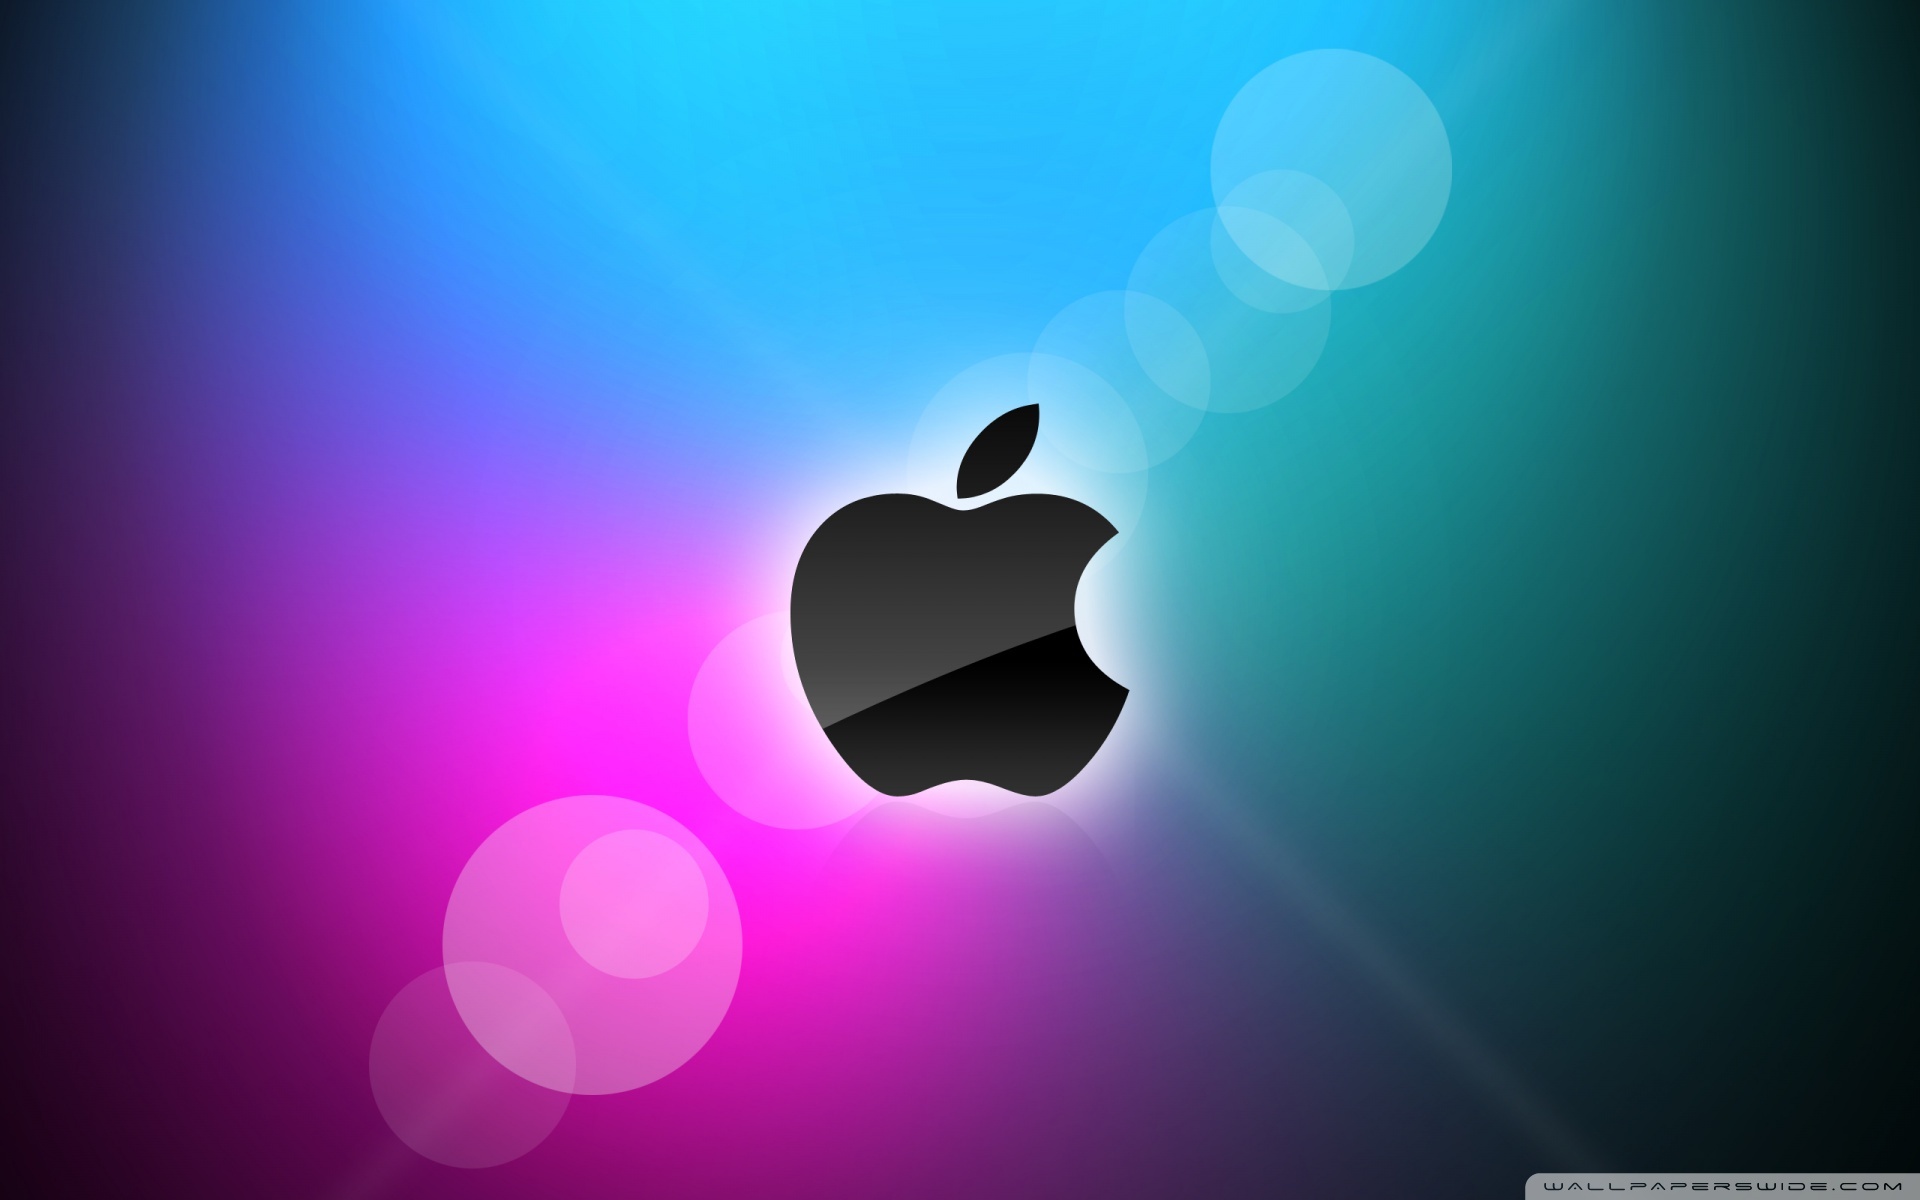 Apple Lover Extreme - Hot New Movies/Cars Wallpaper (25896895) - Fanpop